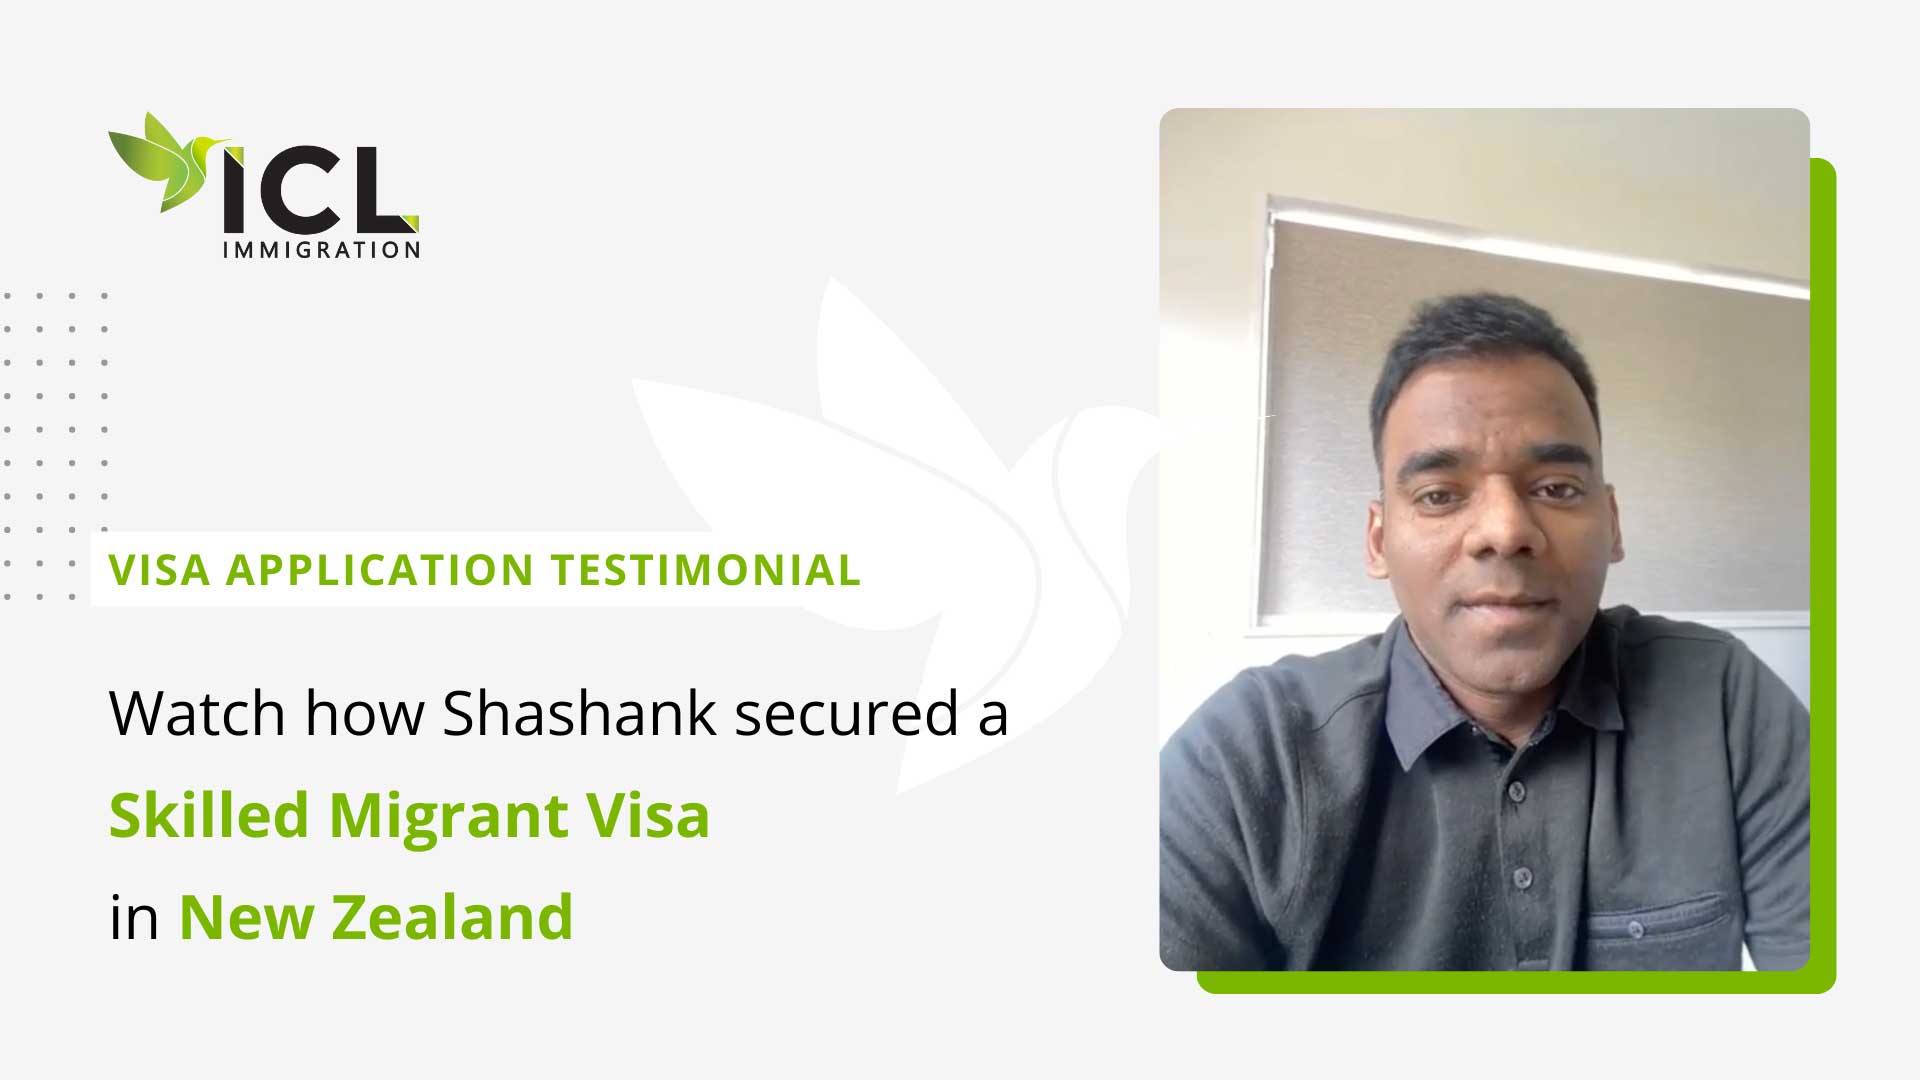 icl-immigration-shashank-case-studies